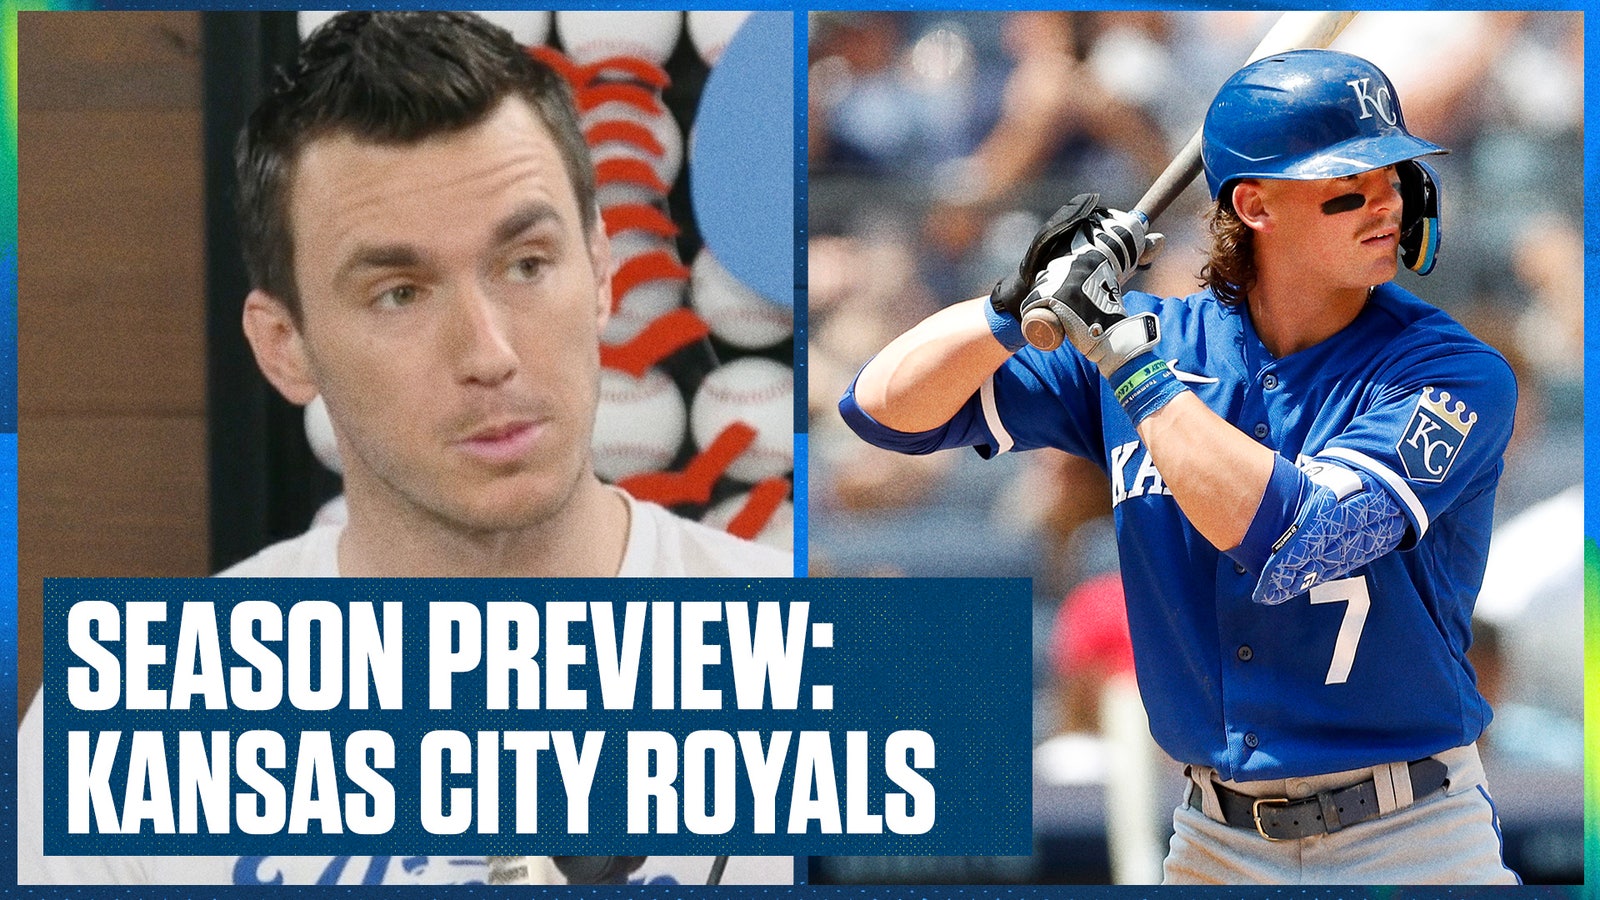 Royals' season preview: Can the young studs make the next step?